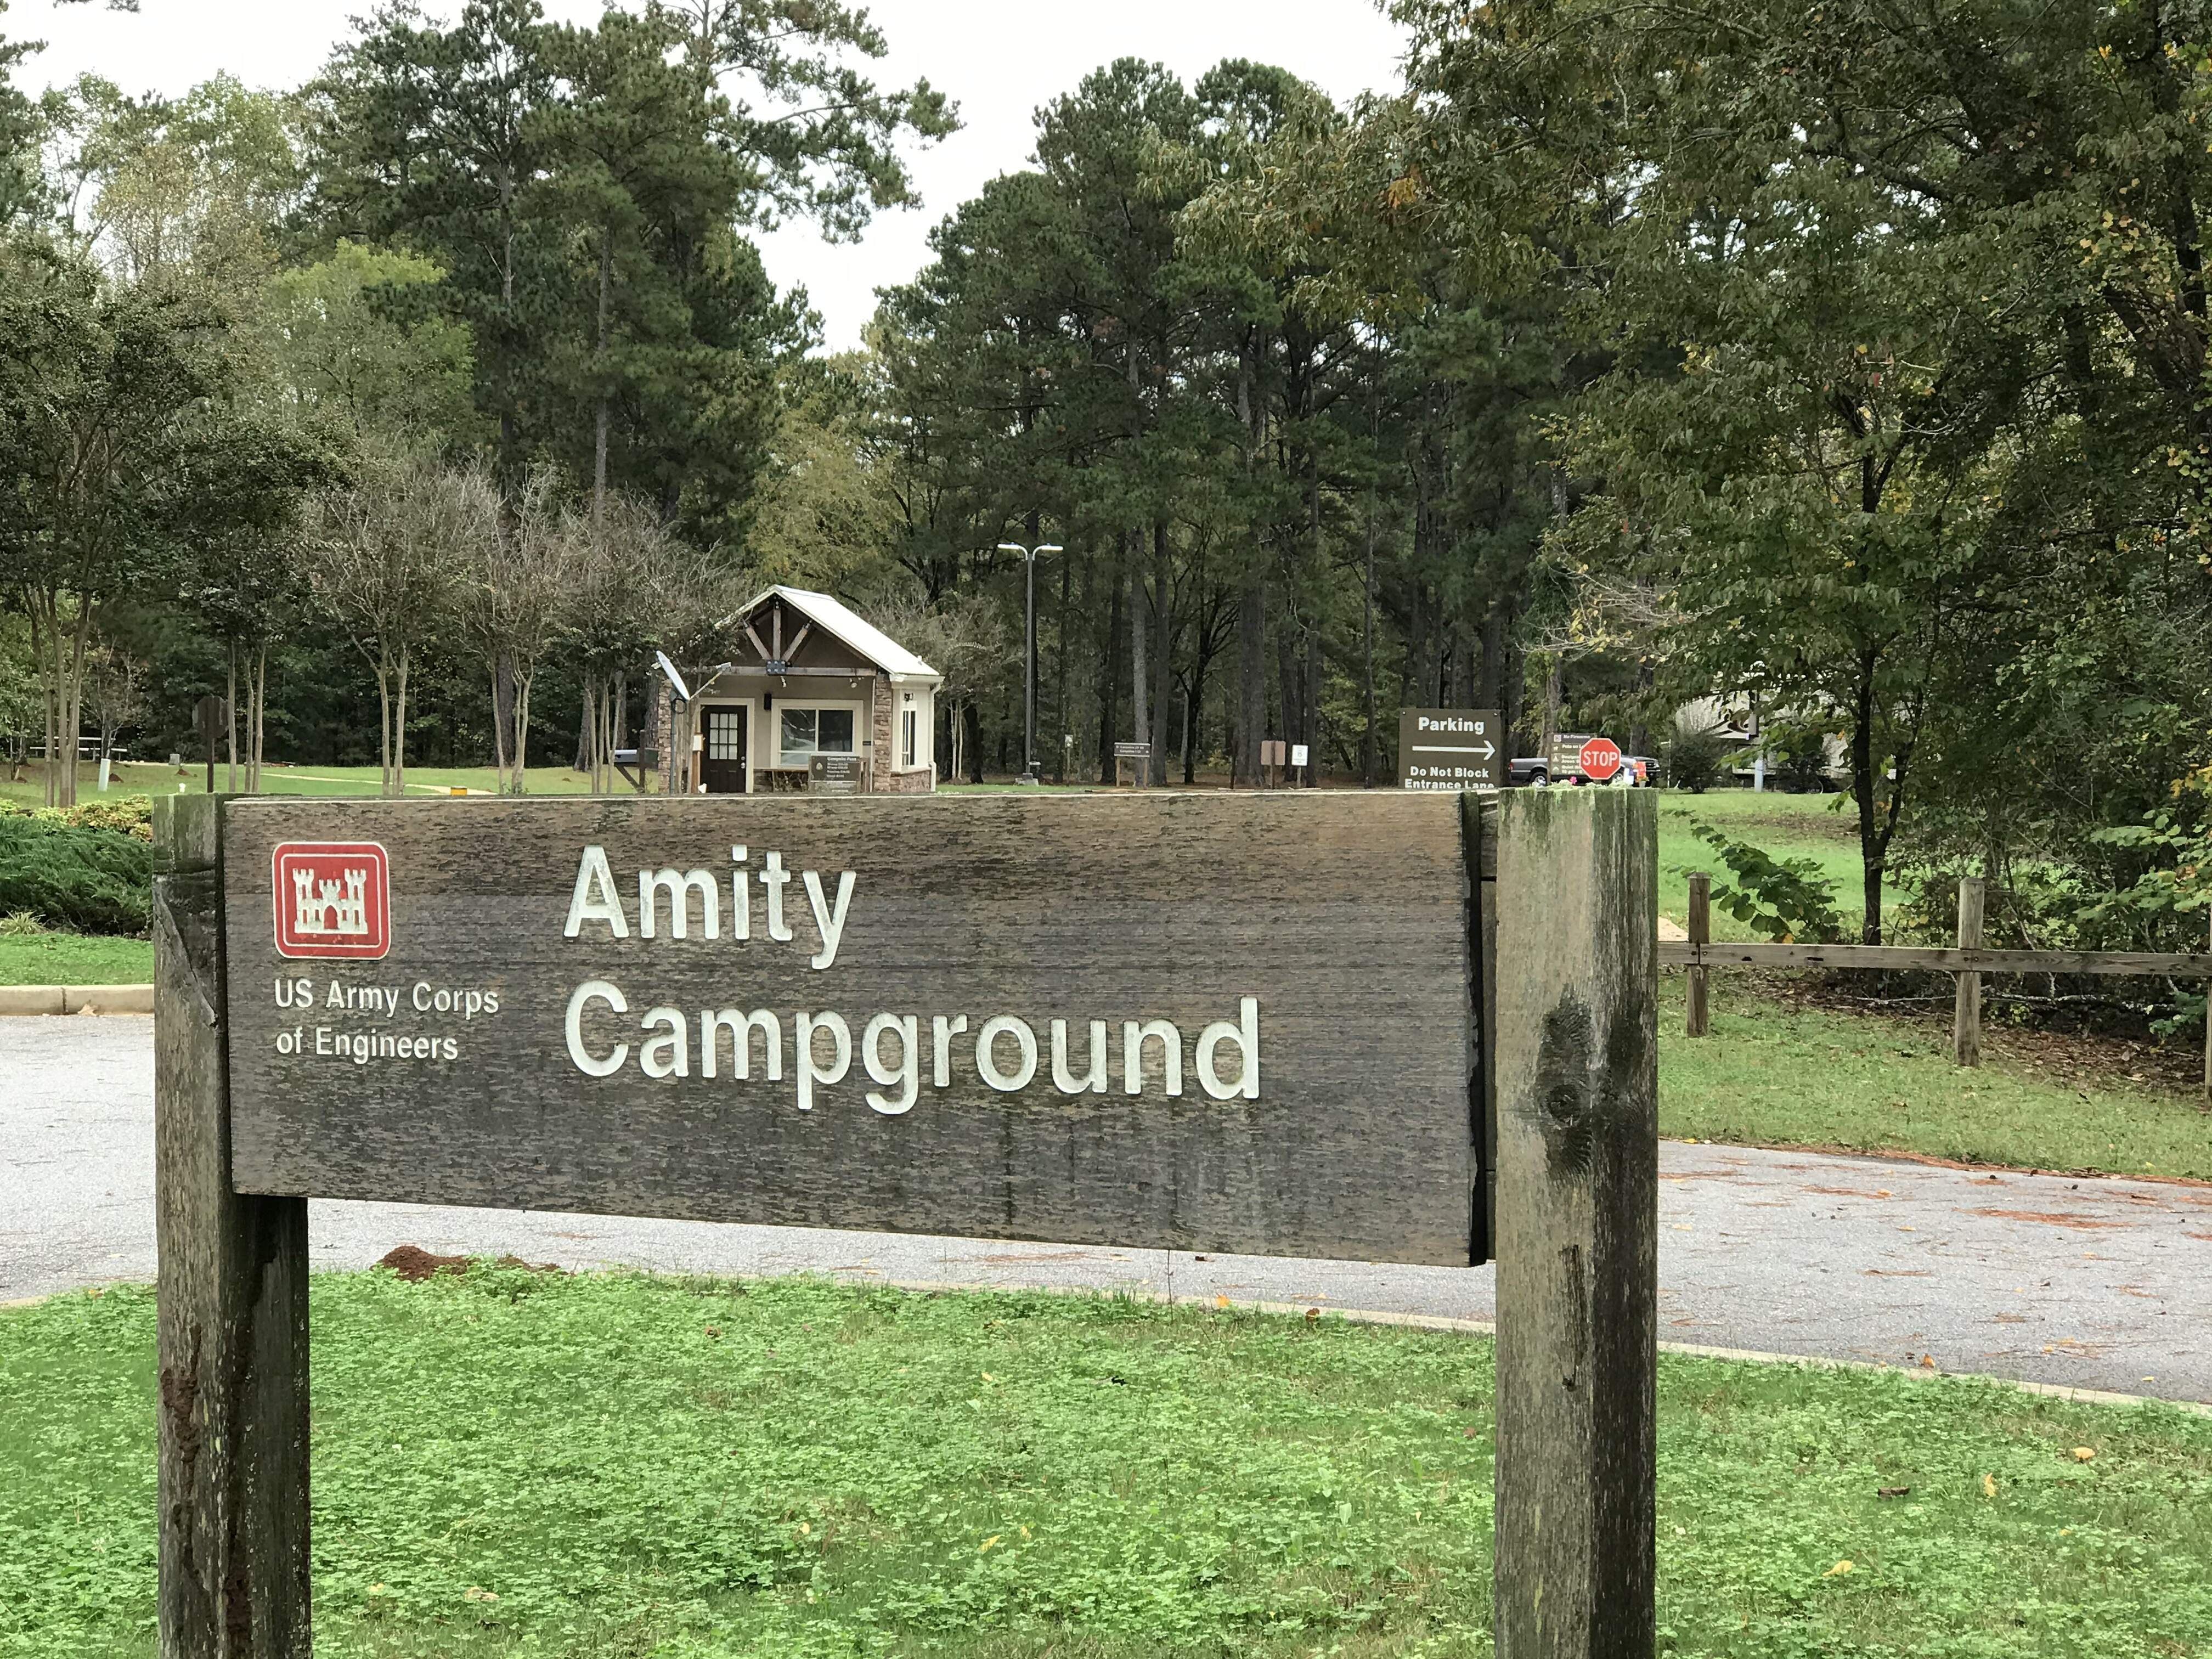 Amity Campground in Lanett, Alabama.